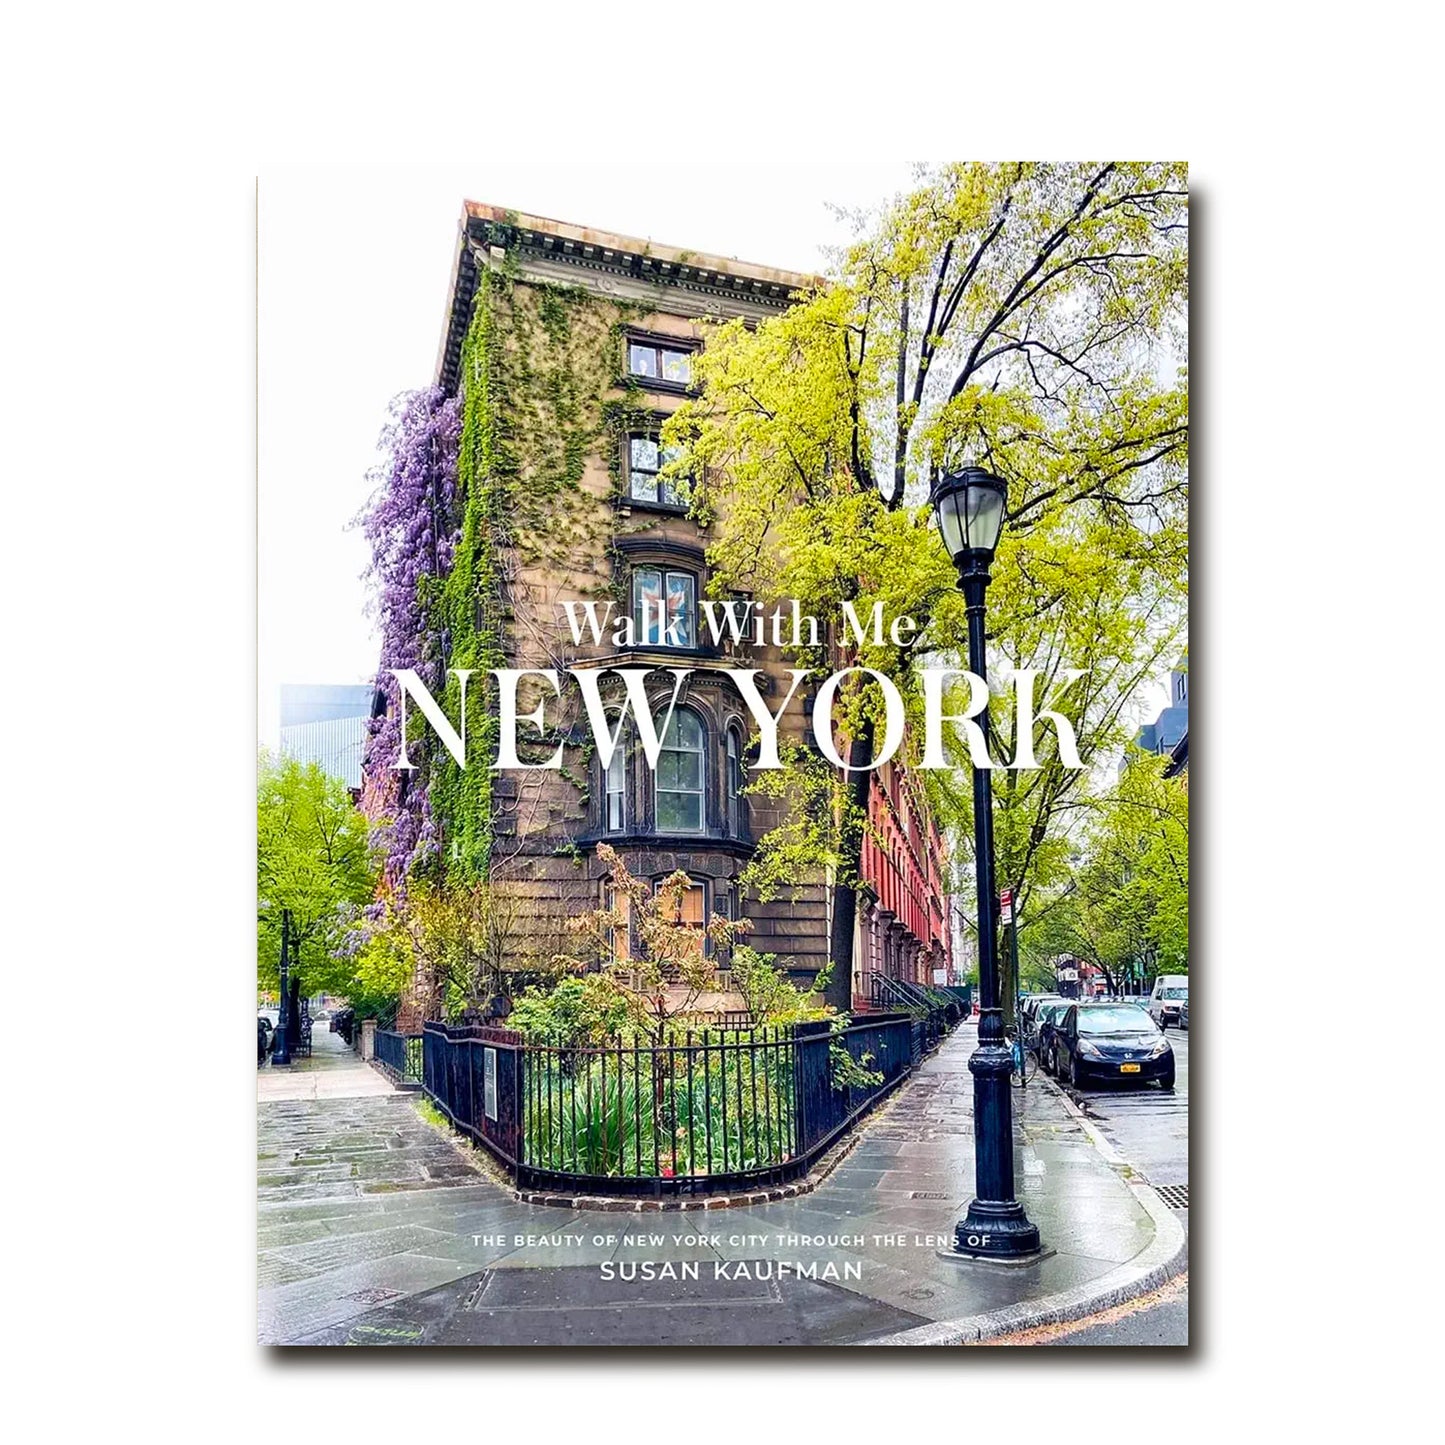 Walk With Me New York NYC photography coffee table book